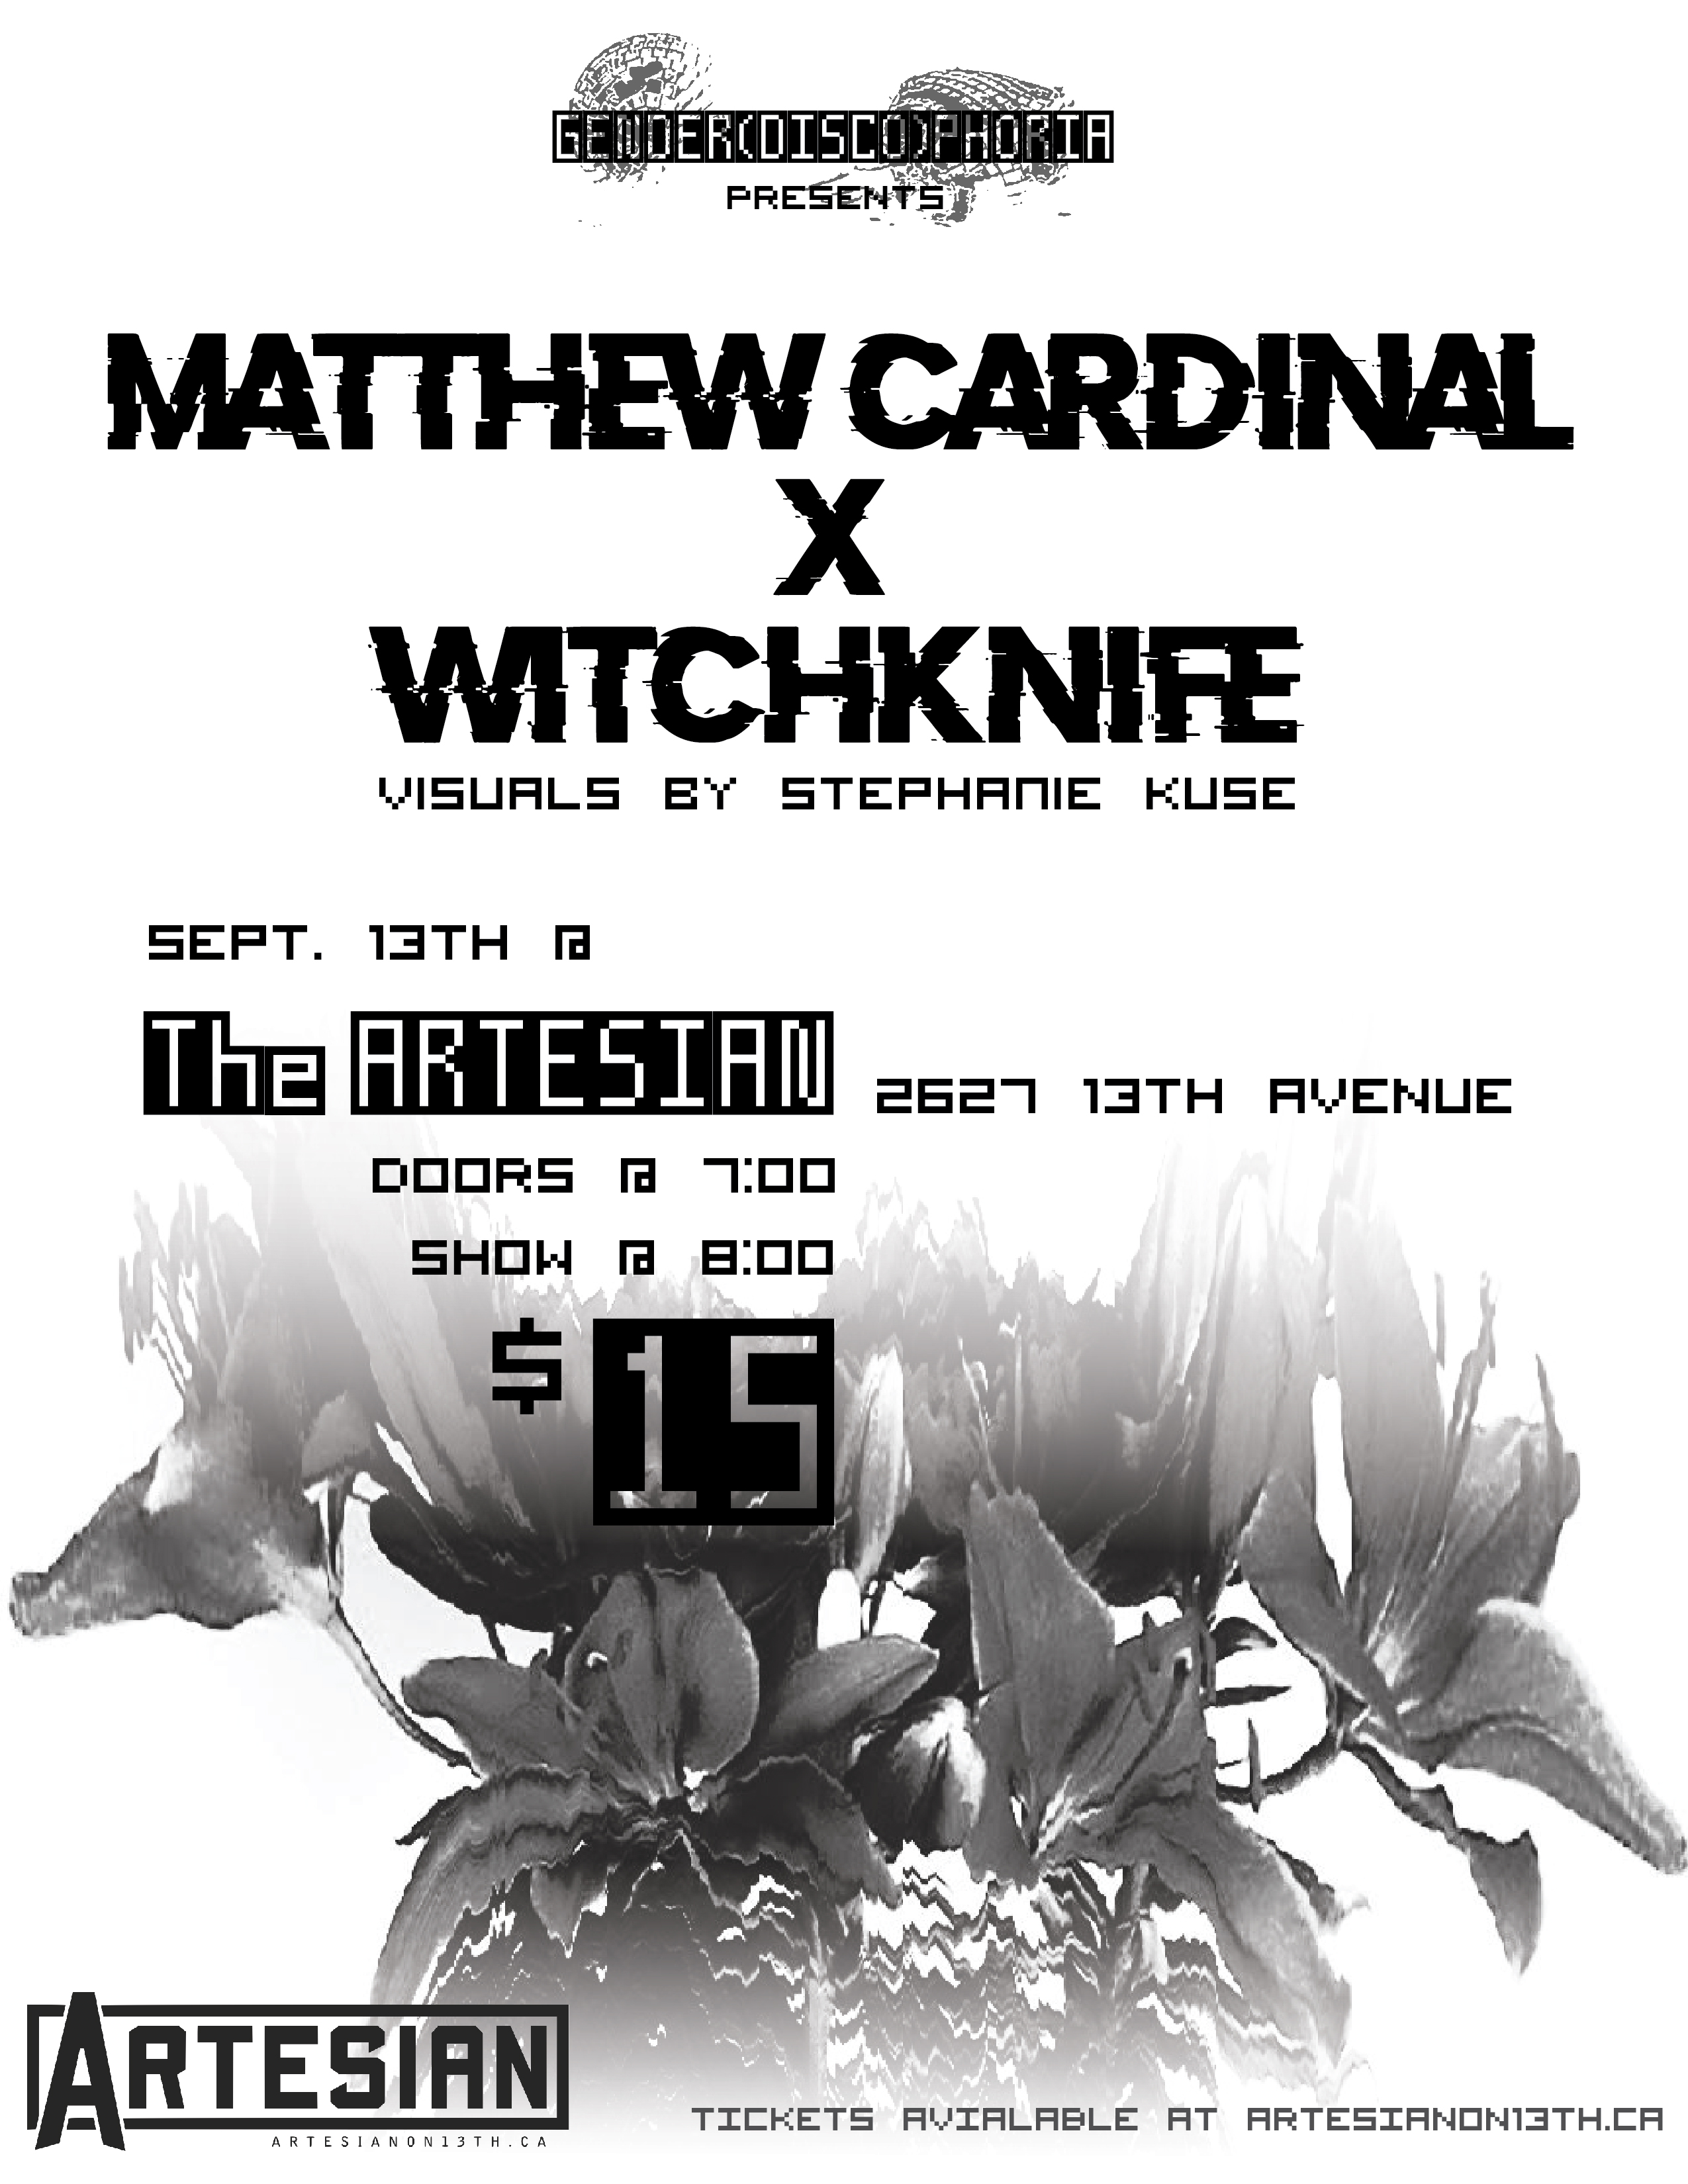 Matthew Cardinal x Witchknife presented by Gender(disco)phoria and the Artesian